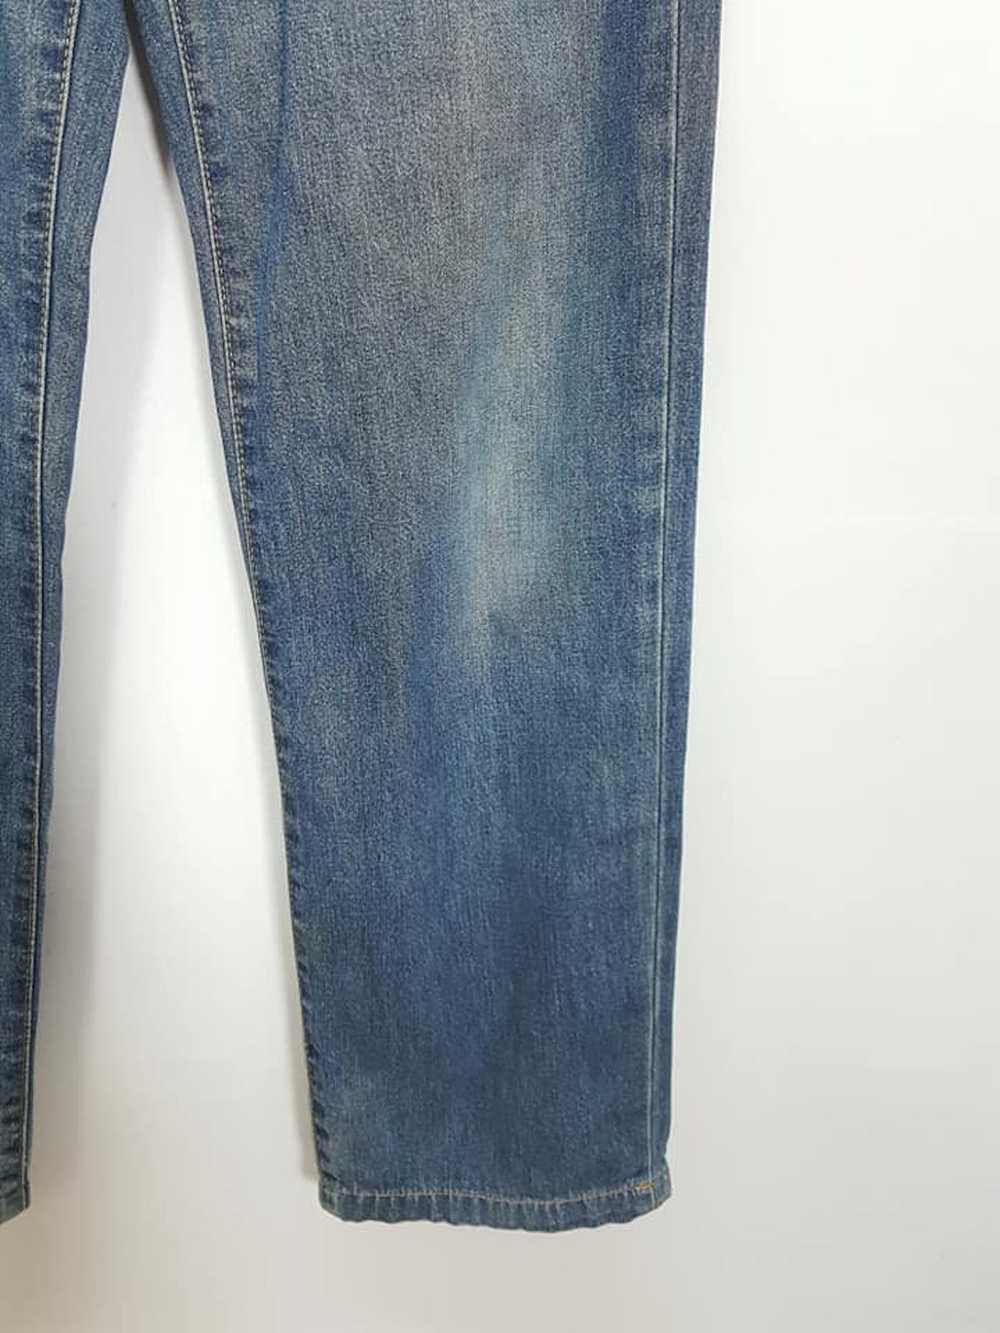 Paul Smith Paul Smith Button Fly Jeans MADE IN JA… - image 12